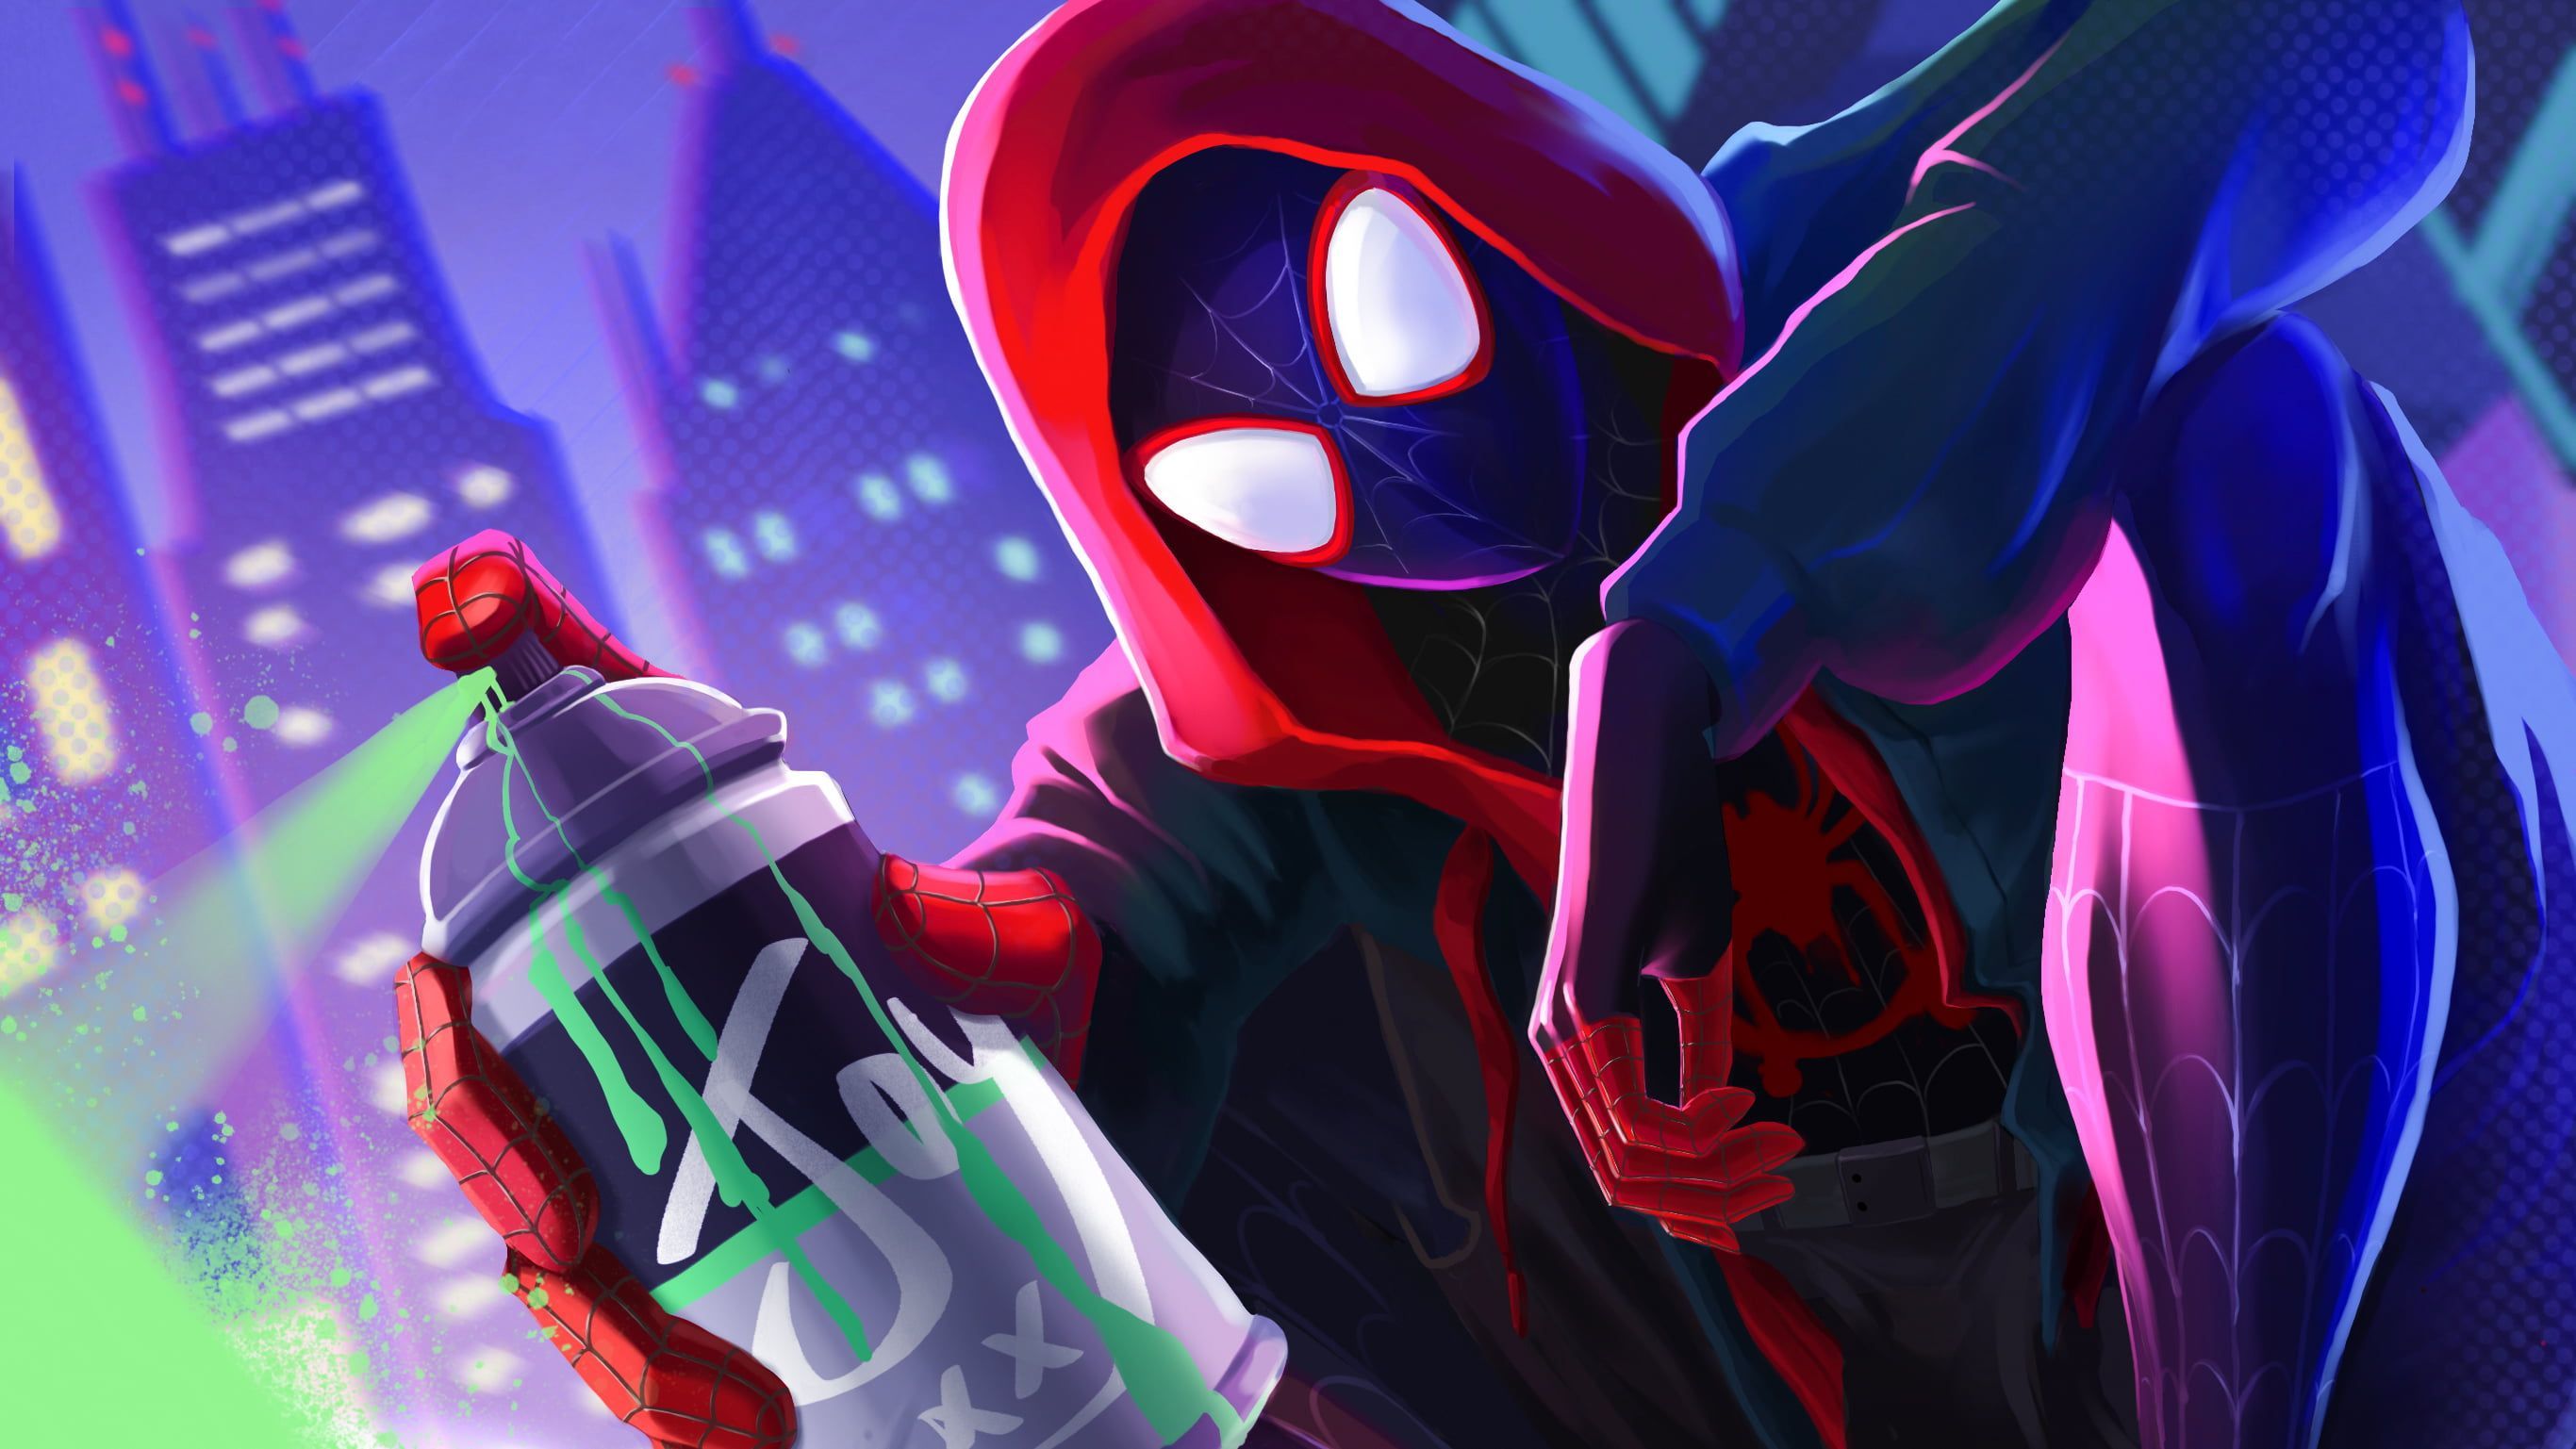 HD Wallpaper: Movie, Spider Man: Into The Spider Verse, Miles Morales 4K Of Wallpaper For Andriod